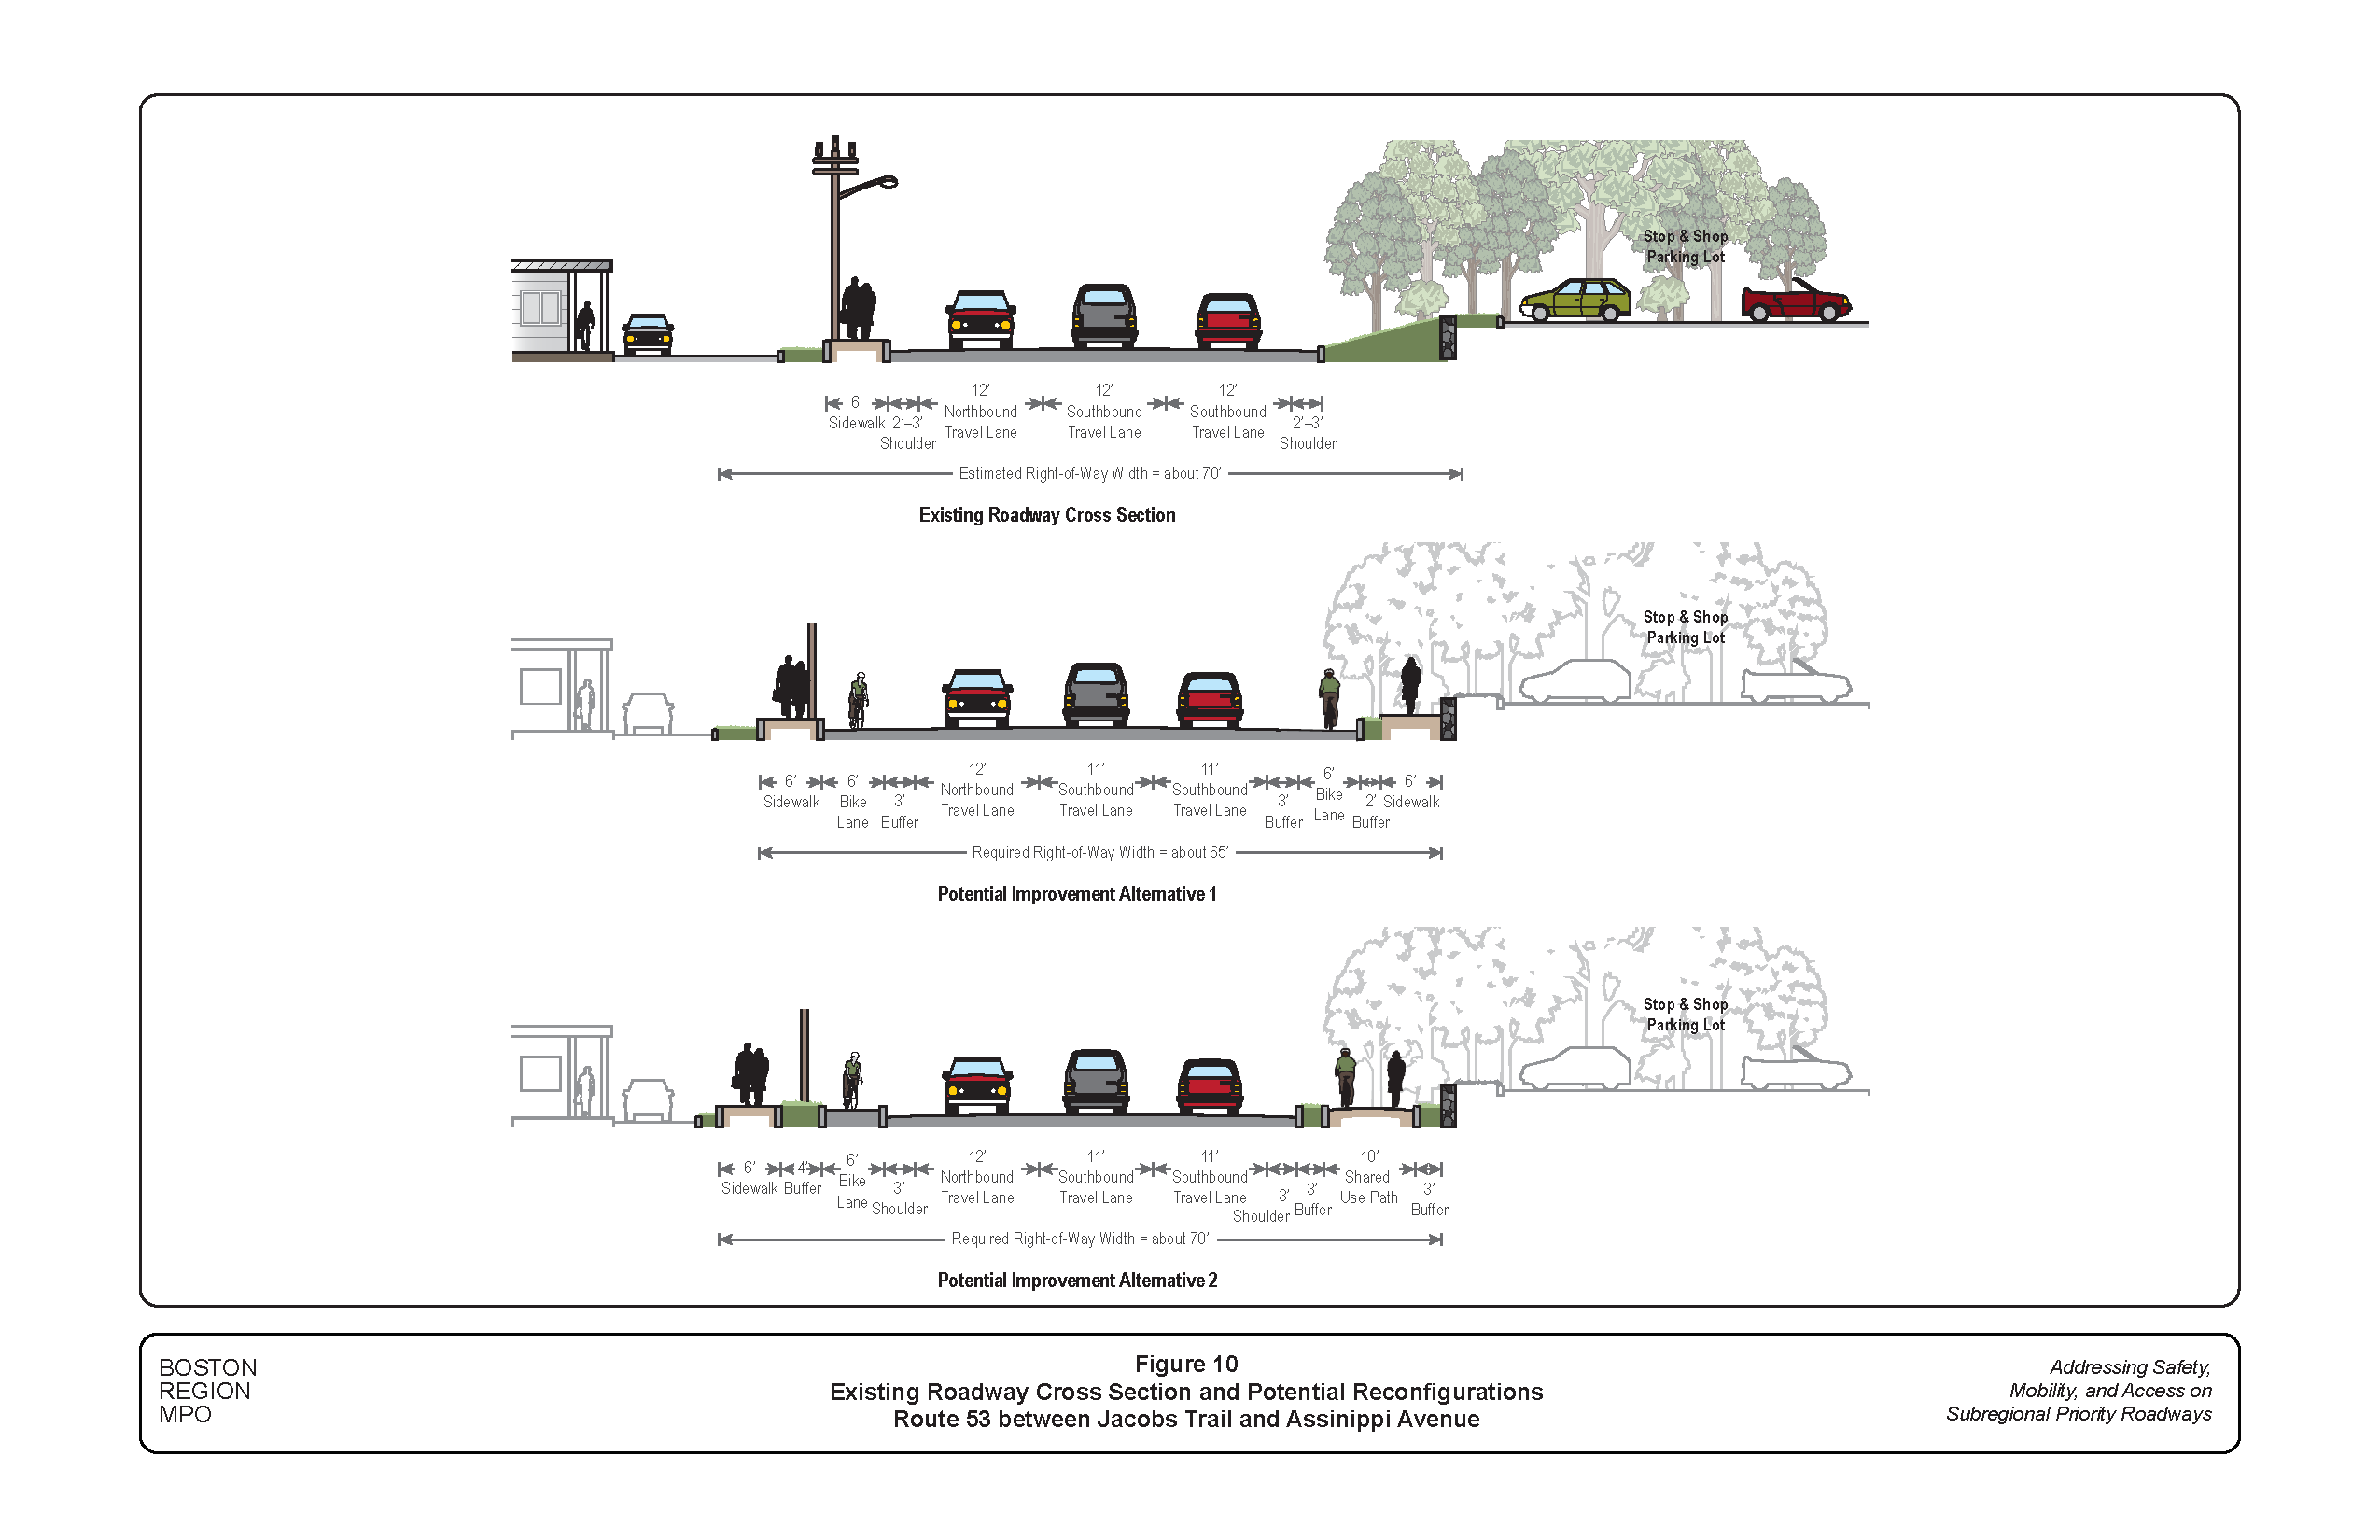 This figure shows the existing roadway cross section of Route 53 between Jacobs Trail and Assinippi Avenue and potential reconfiguration alternatives to accommodate all users of the roadway, including people who walk and people who bike.